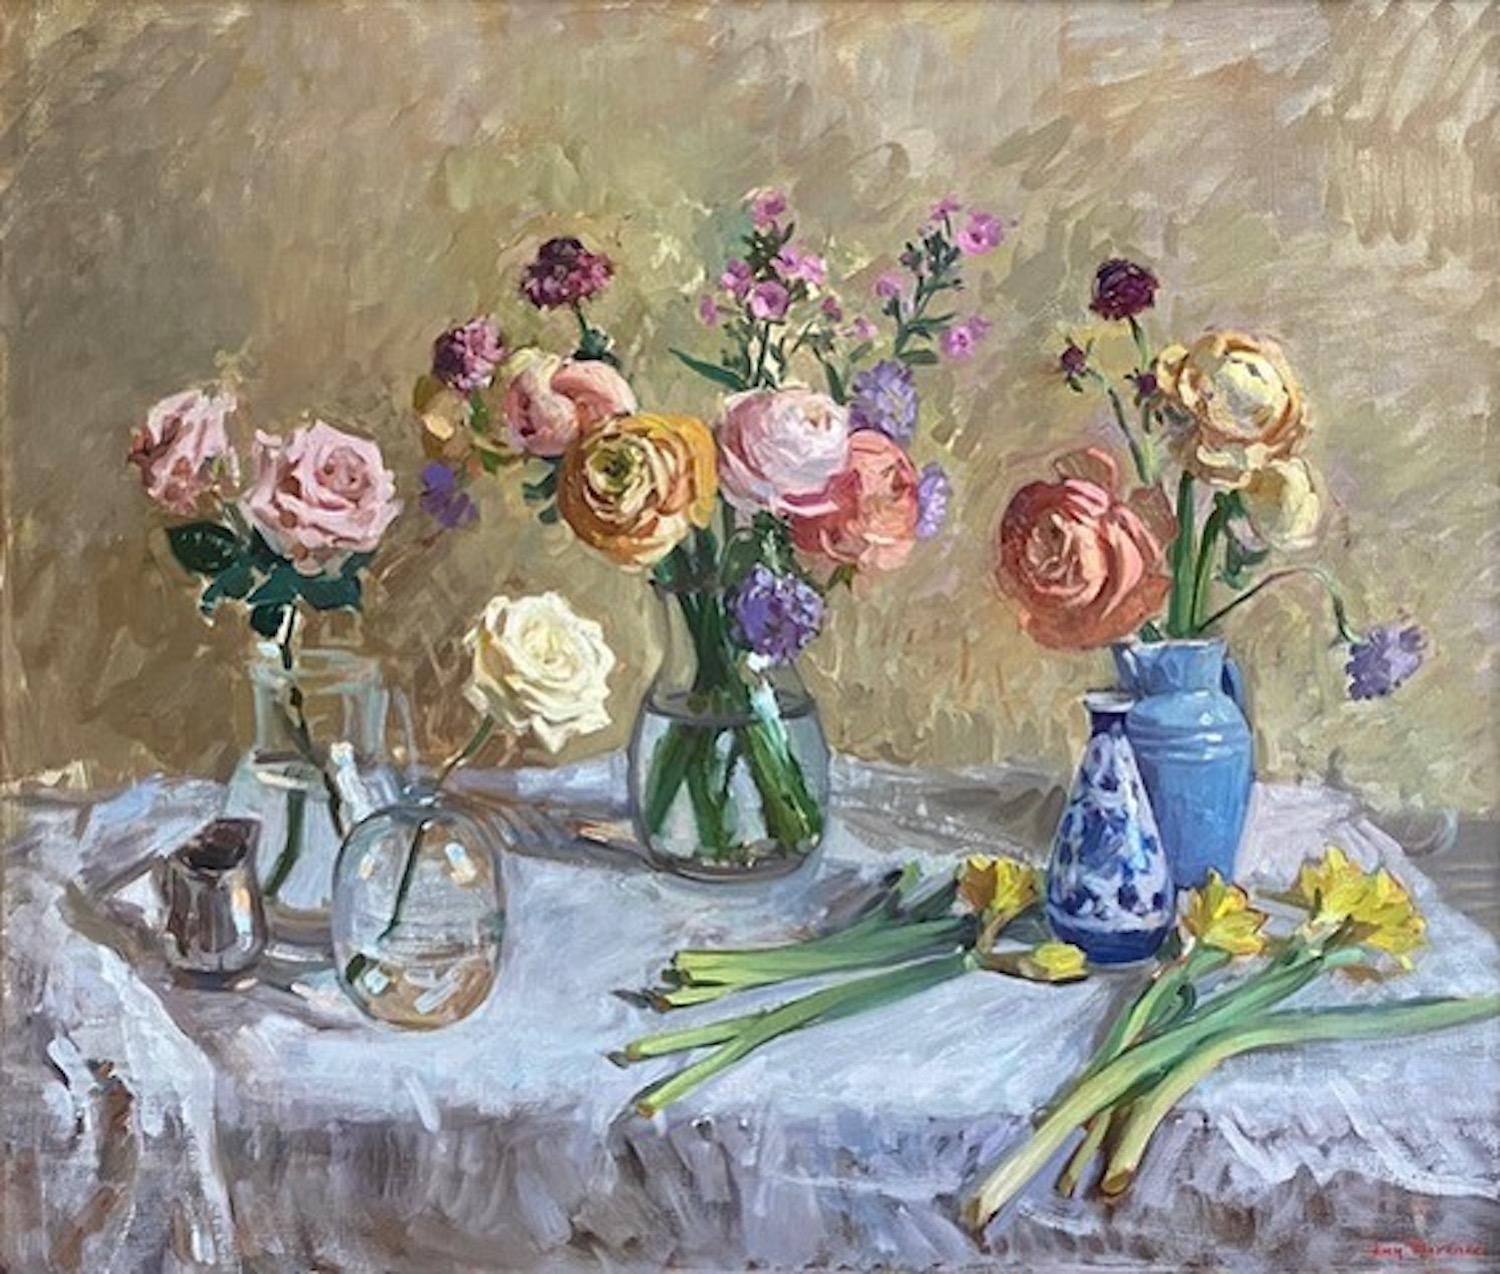 "Ranunculus and Roses" bright contemporary impressionist flower still life